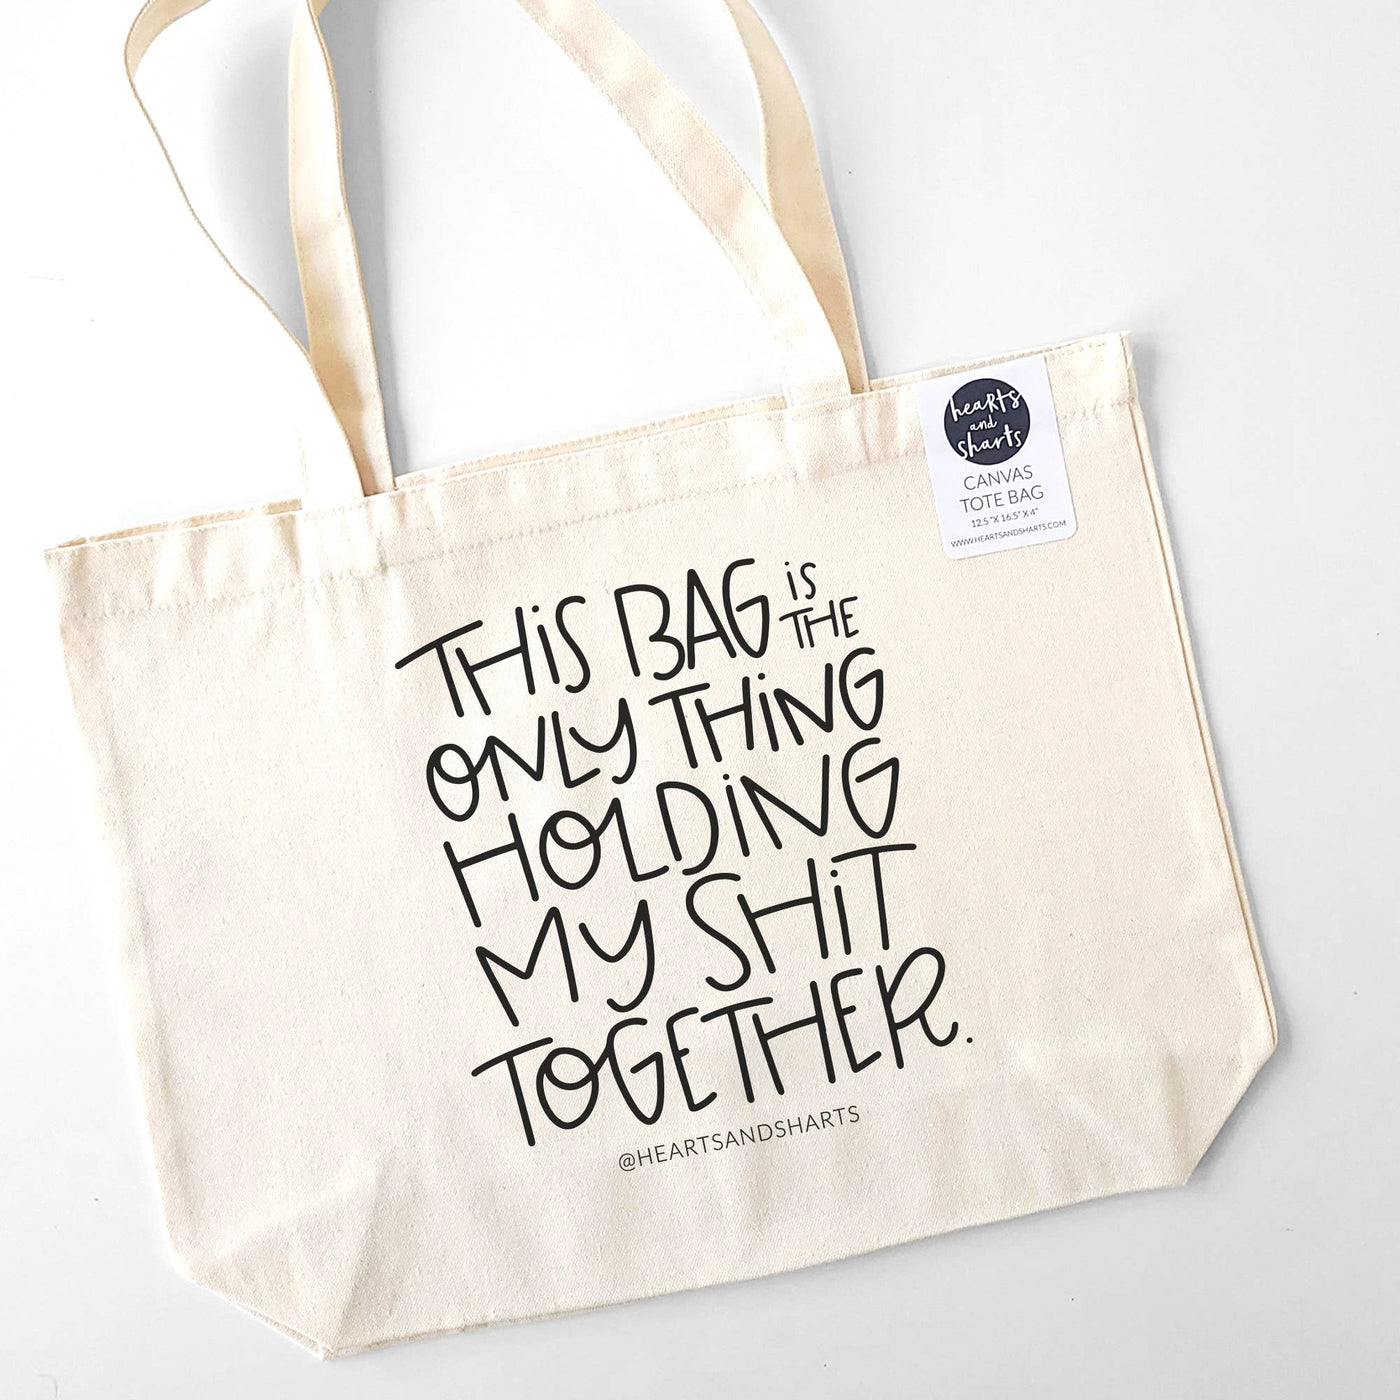 HOLDING MY SHIT TOGETHER TOTE